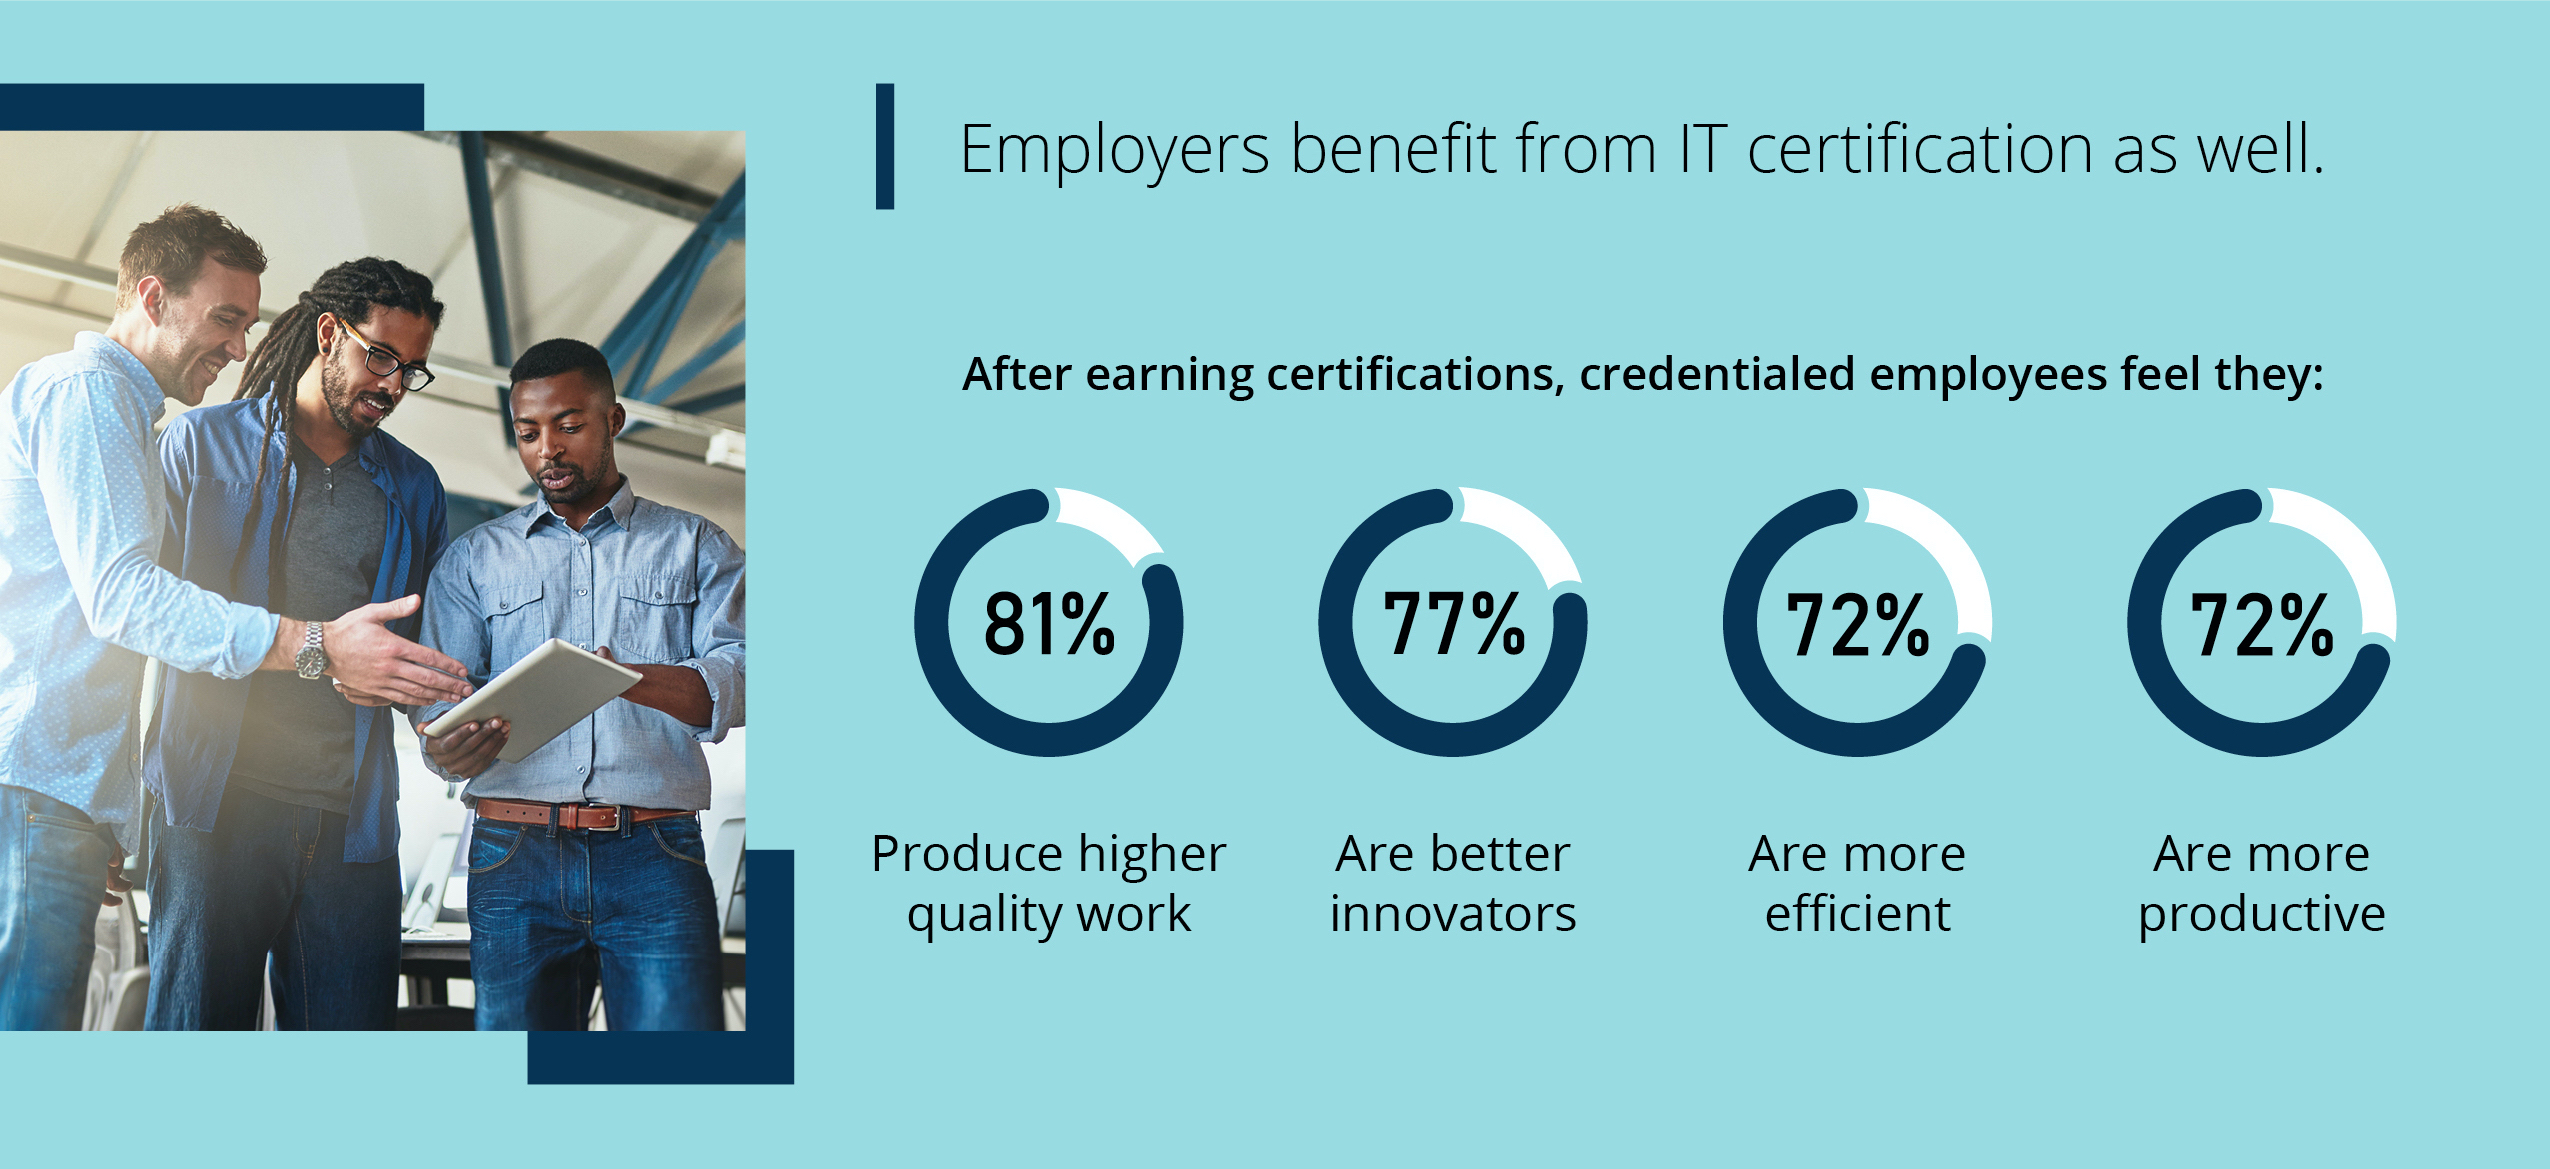 Employers benefit from IT certification as well. After earning certifications, credentialed employees feel they: 81% produce higher quality work, 77% are better innovators, 72% are more efficient, 72% are more productive.